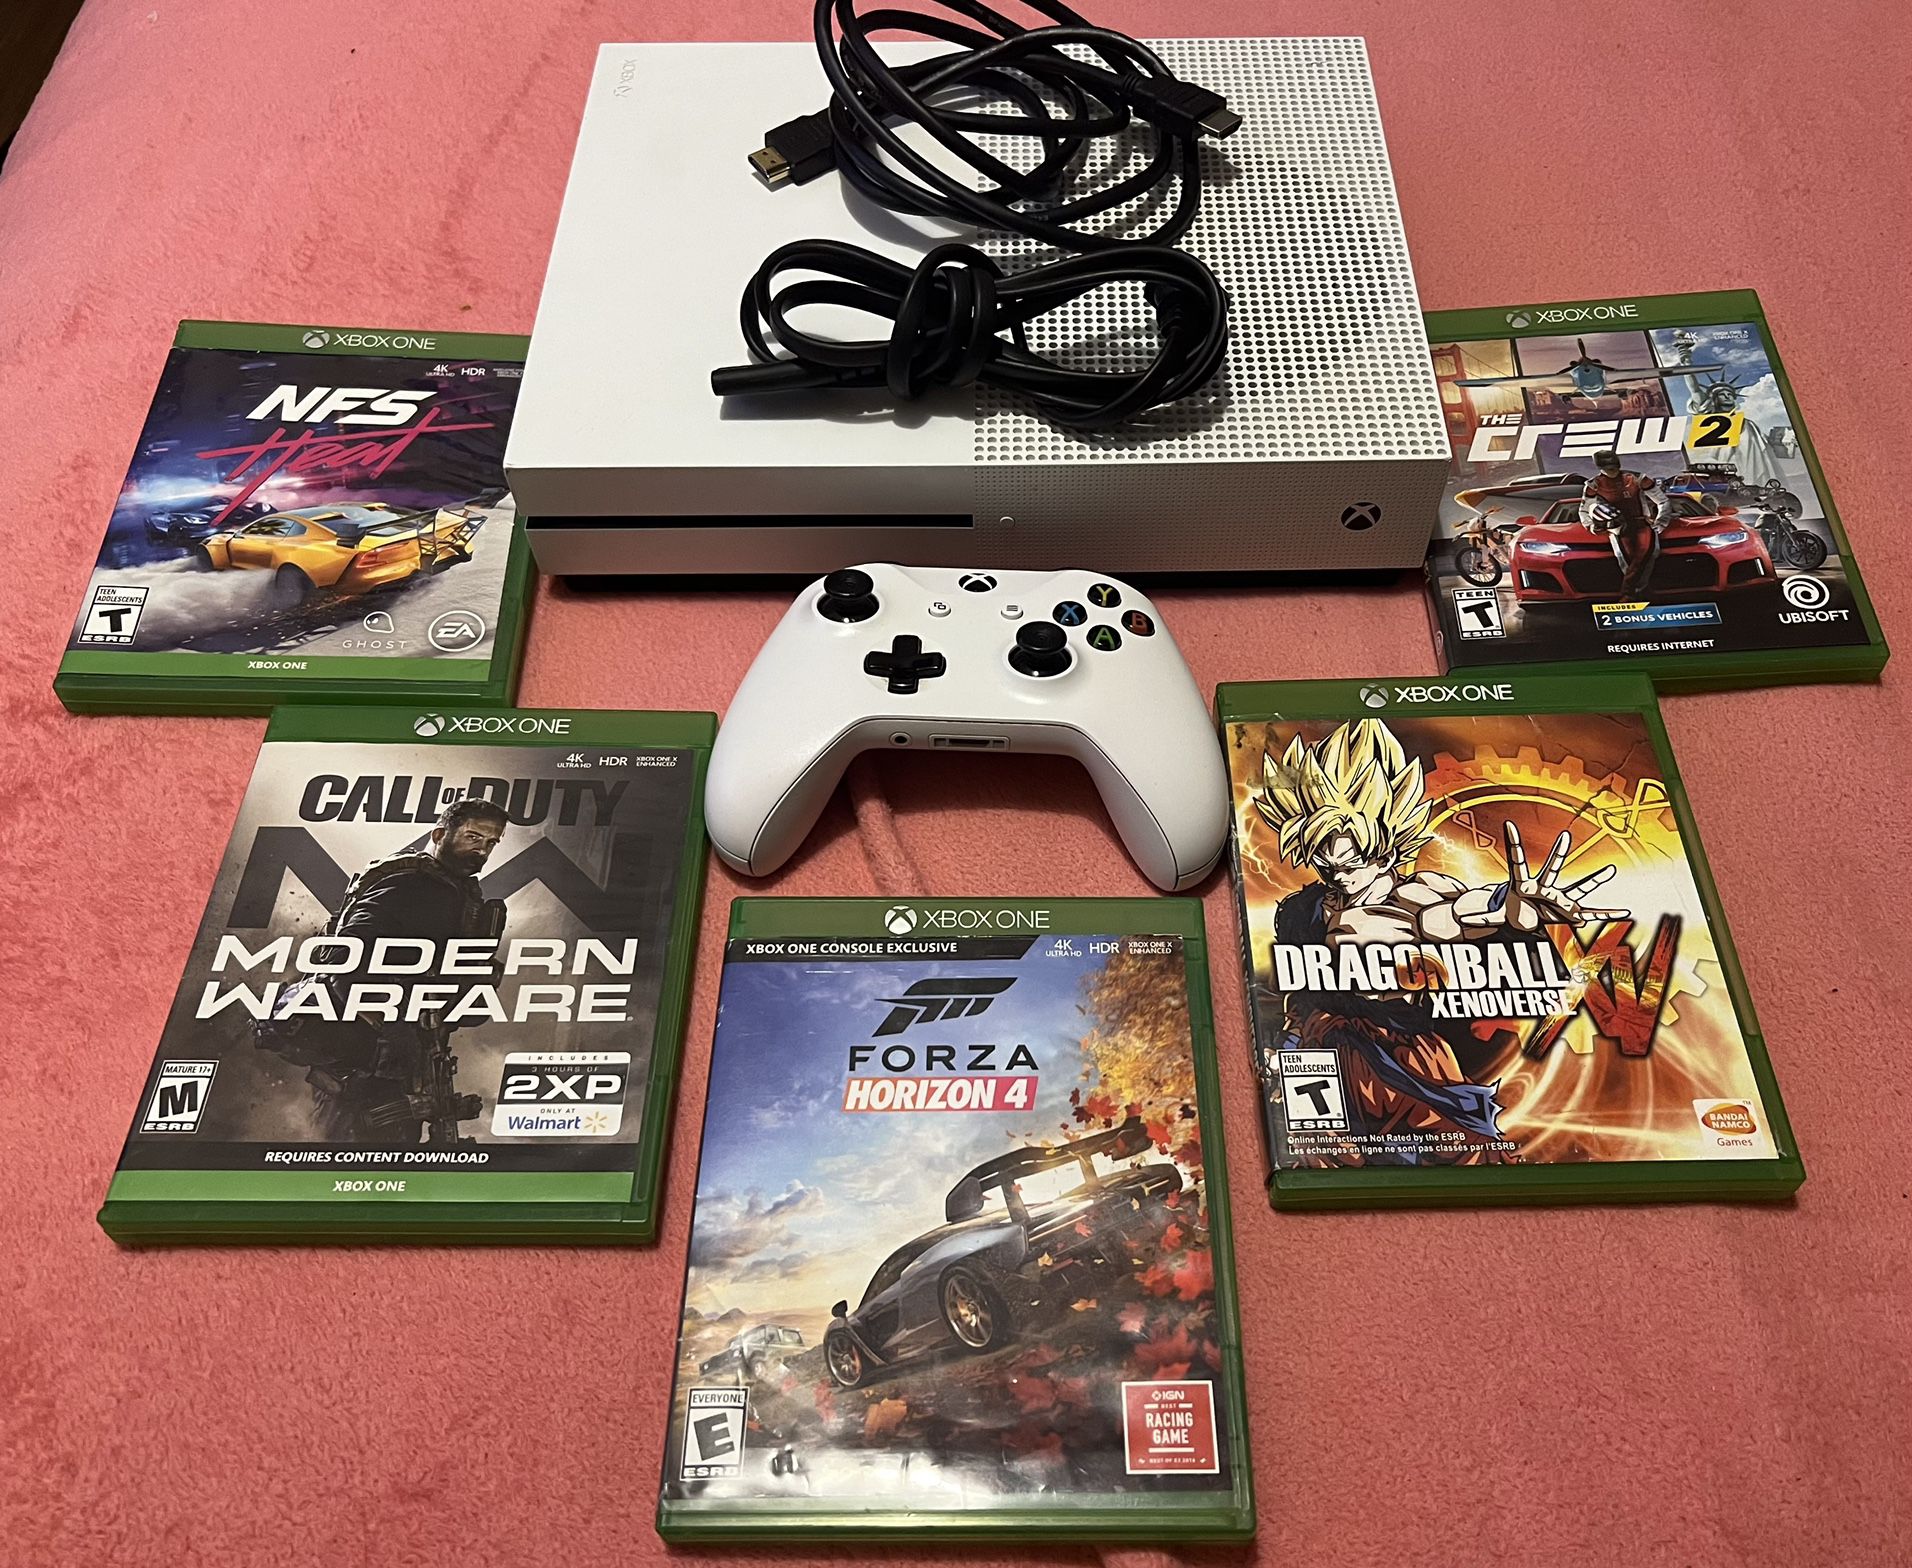 XBOX ONE S 1TB HD FULL 4K IN PERFECT CONDITION LIKE NEW + 5 GAMES, CABLES AND CONTROL